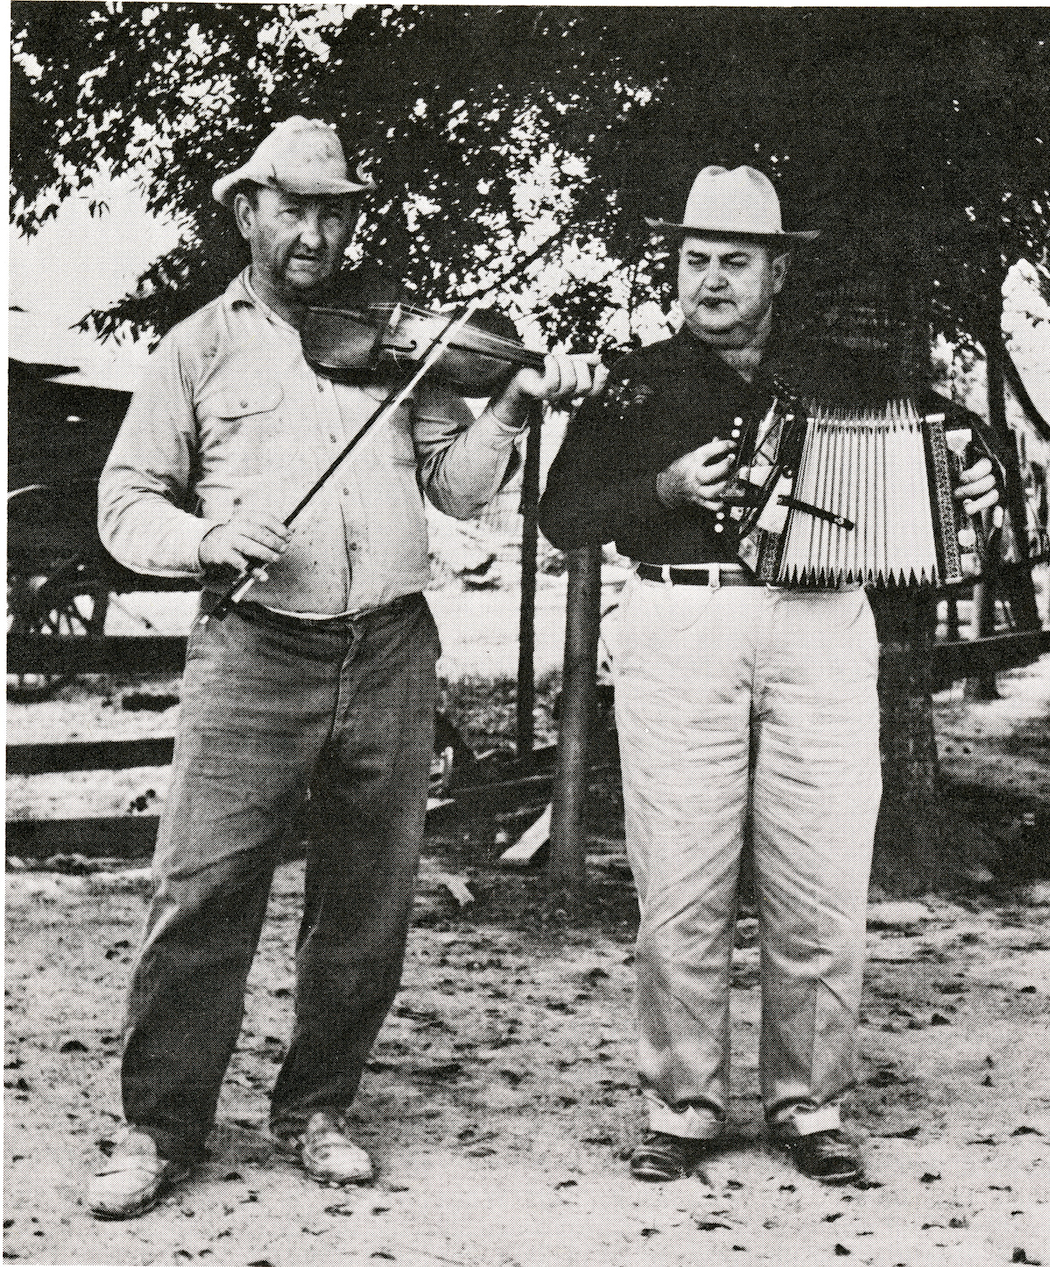 Cajun musicians stage an impromptu concert at the first Festival of American Folklife. Smithsonian Institution Archives, Record Unit 371, Box 1, Folder July 1967.